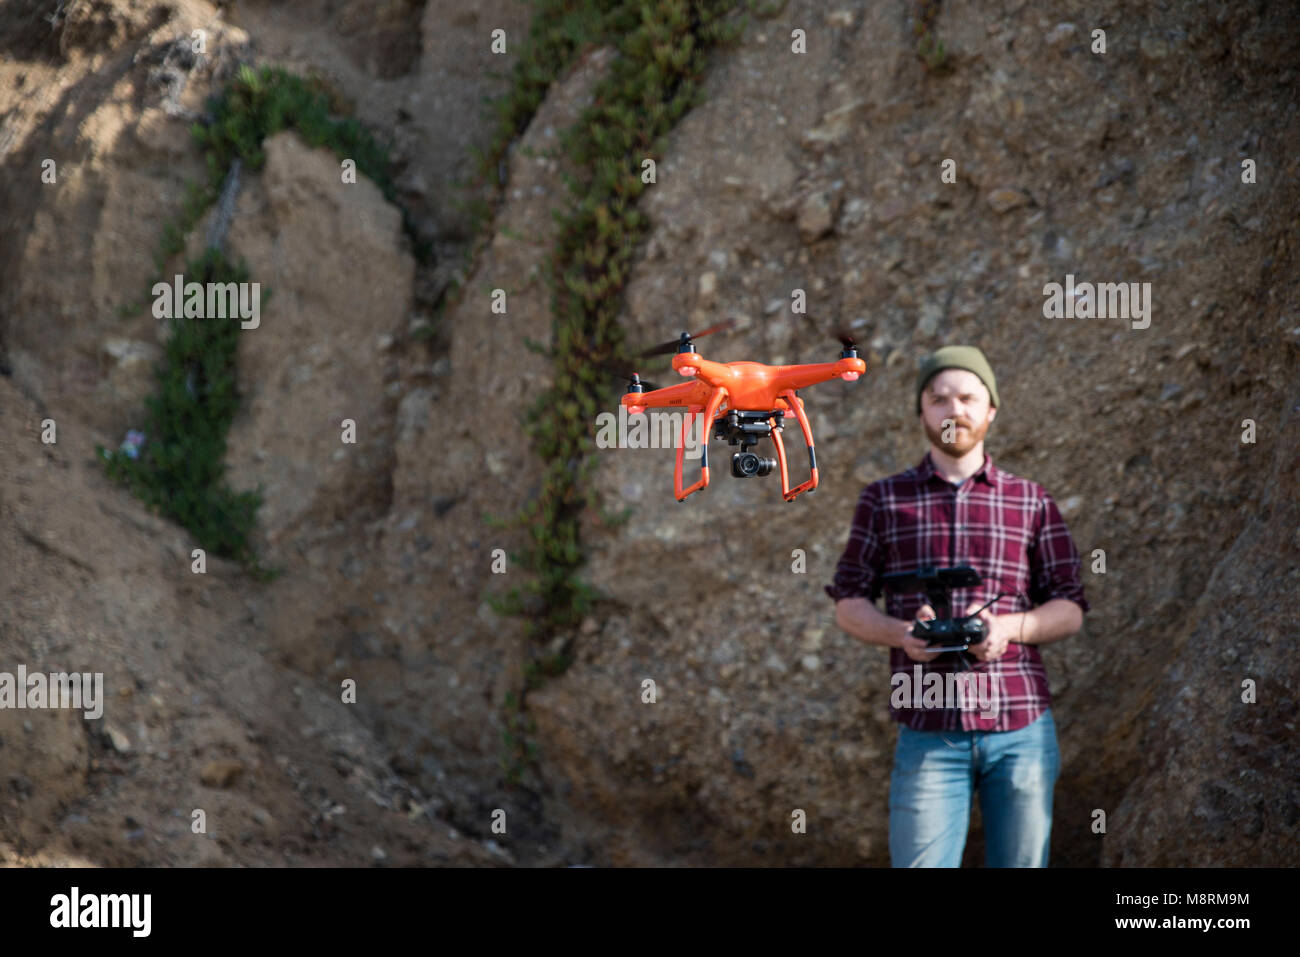 Man flying drone while standing against rock formation Stock Photo